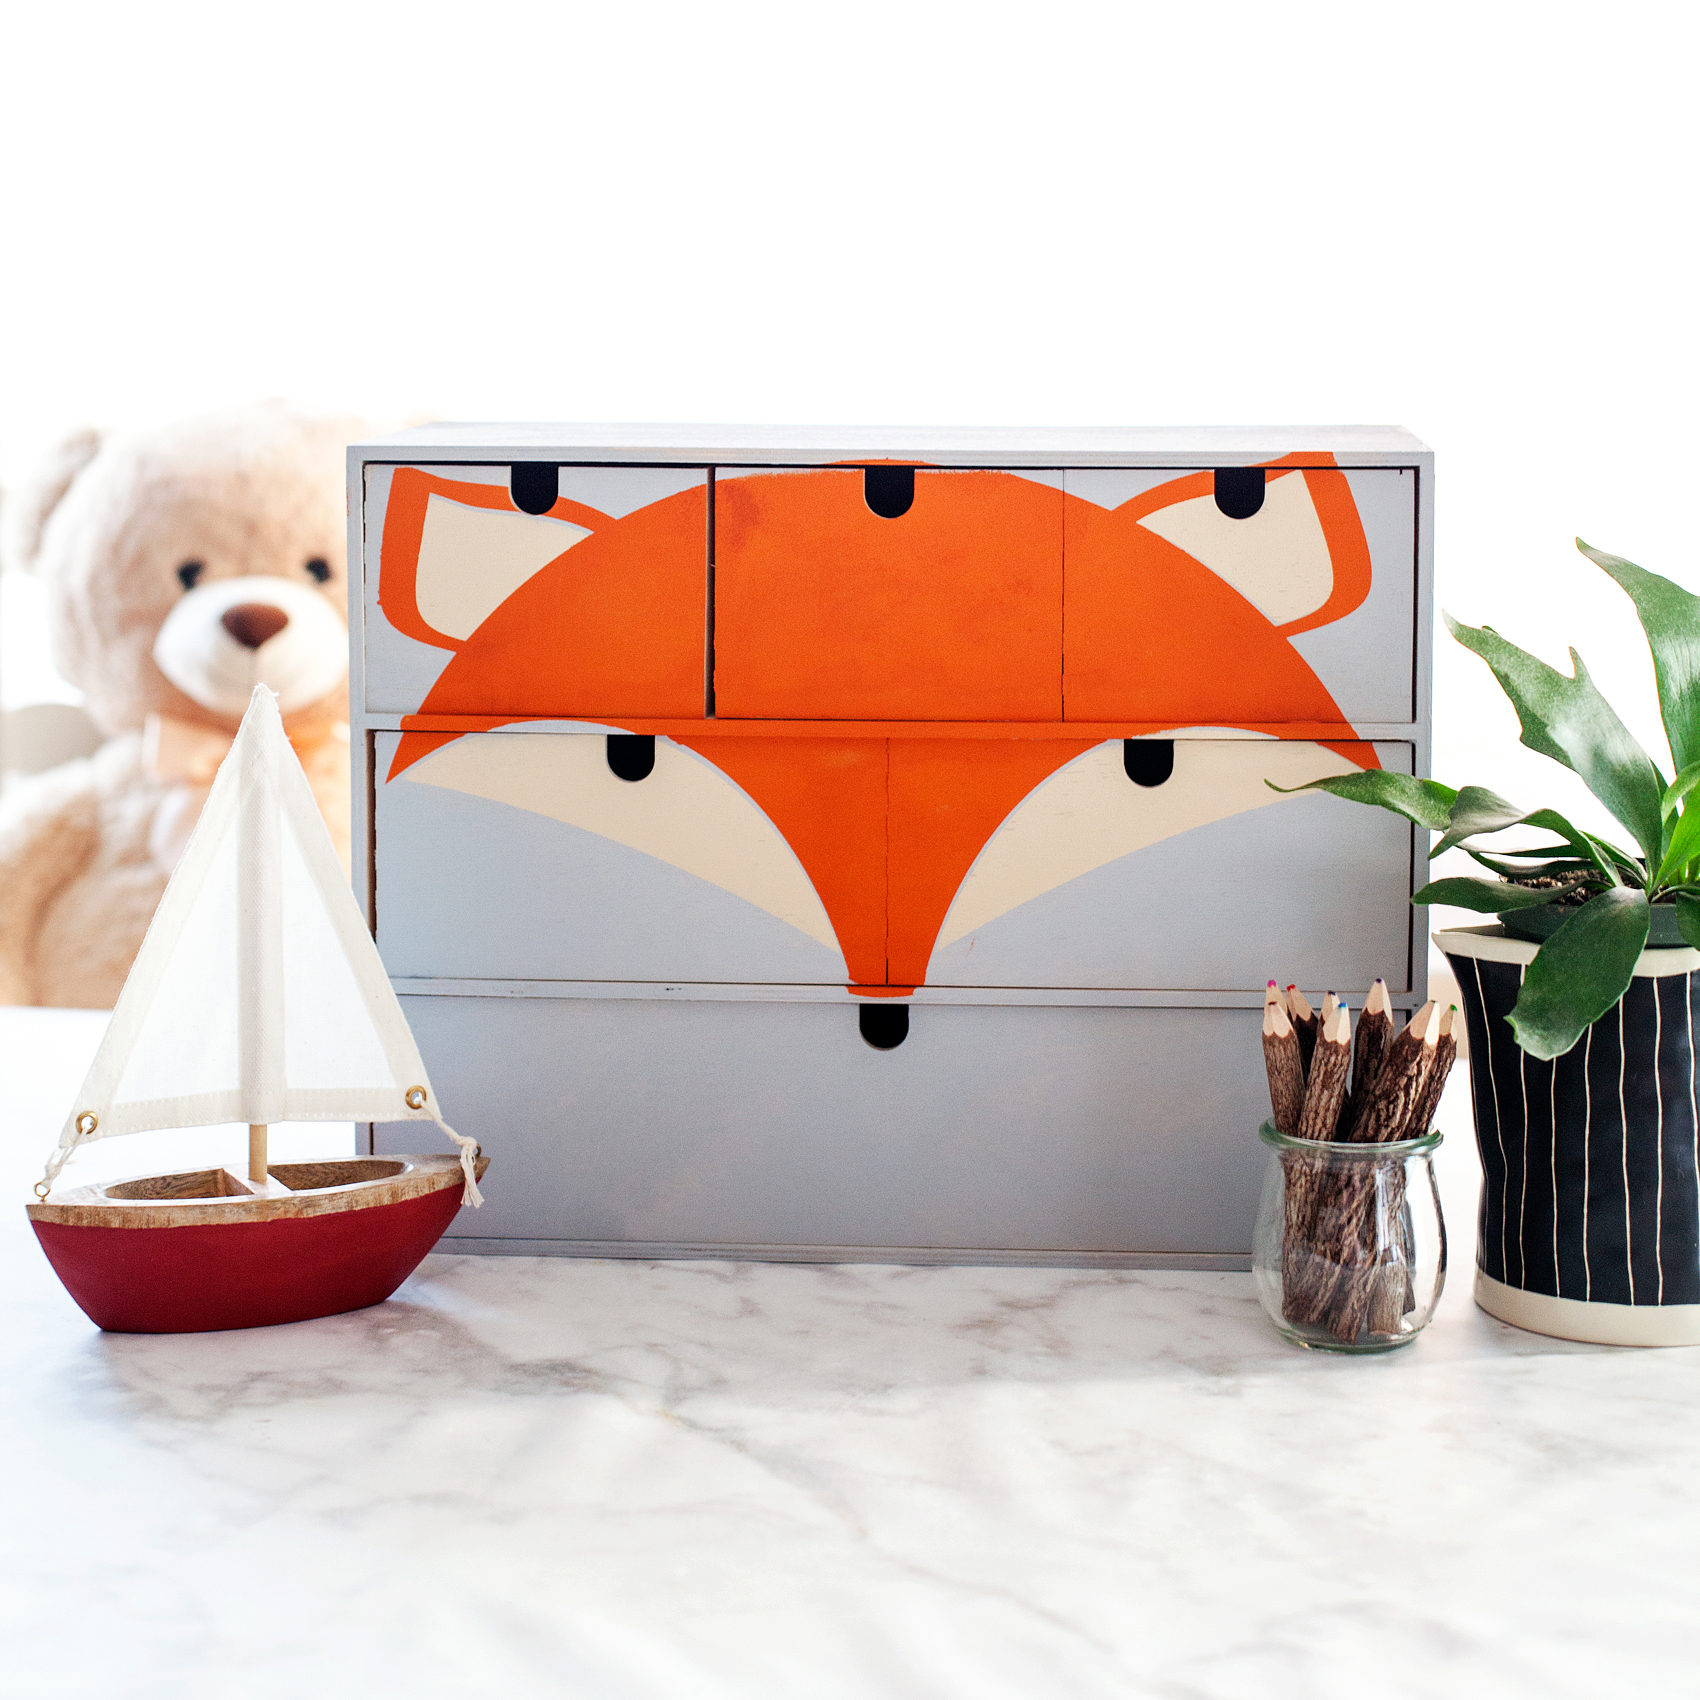 Transform a simple mini storage chest from IKEA into this cute little fox storage chest for your little ones little toys and trinkets. I used some of the @decoart chalky finish paint along with my @cricut Maker to create this fun design for my little boys room • WhipperBerry